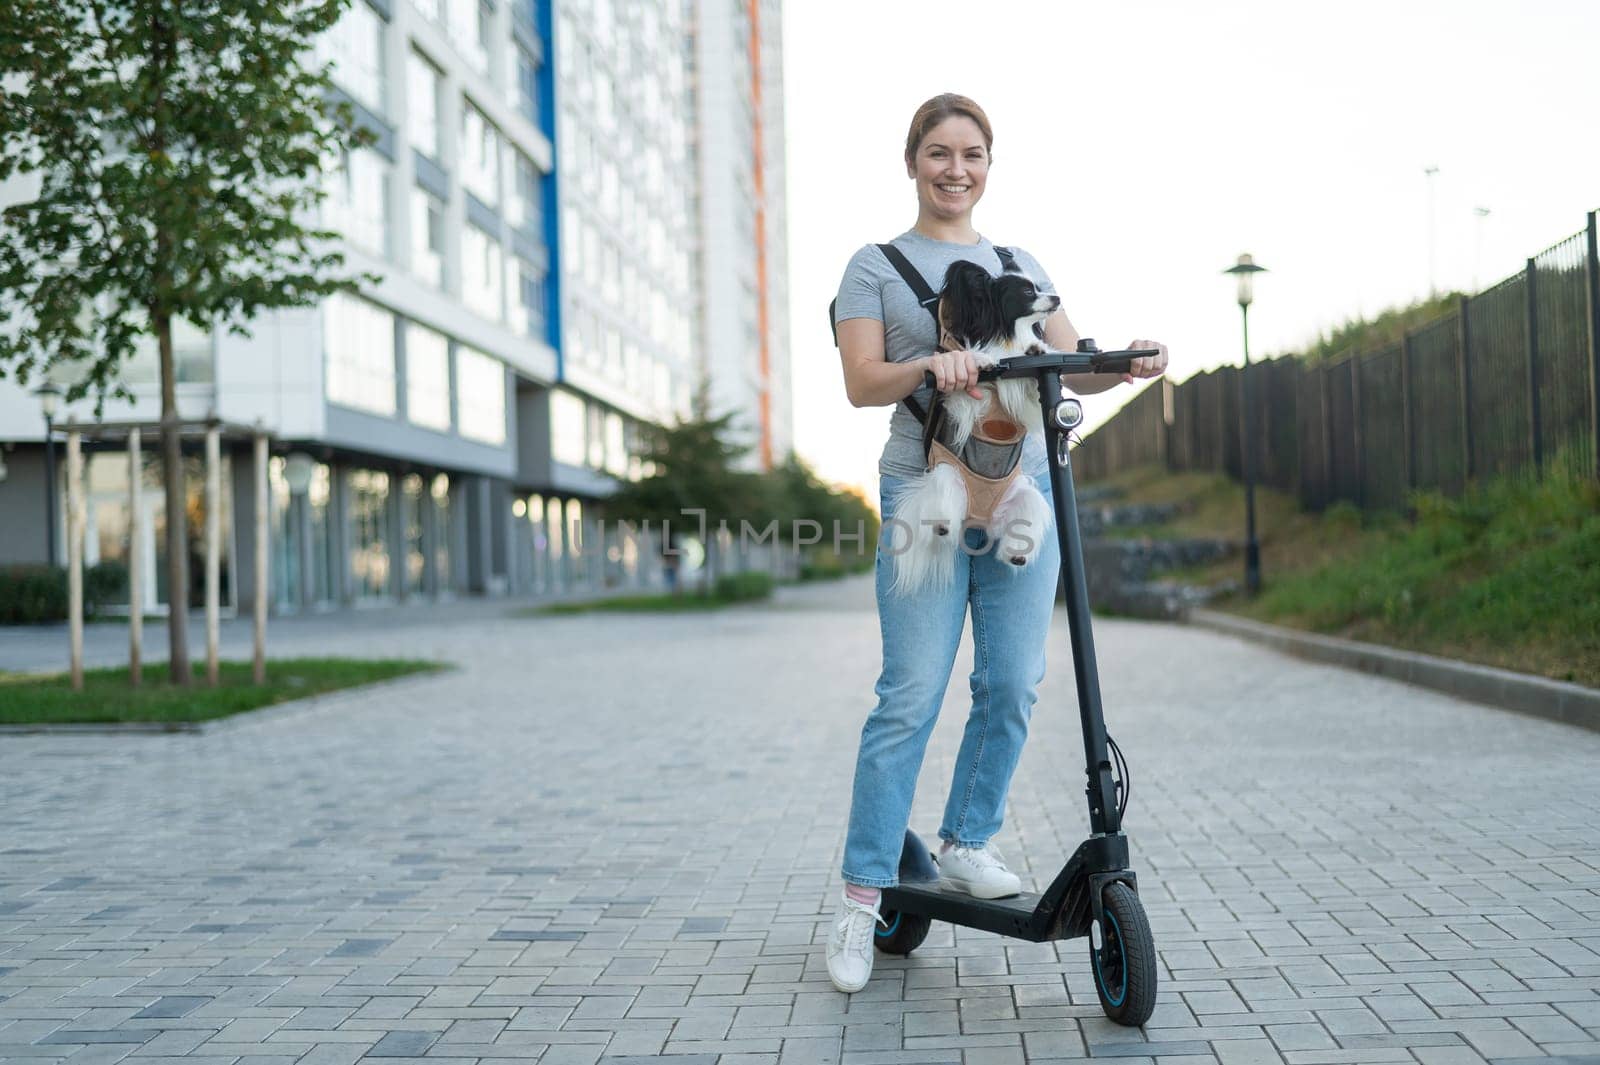 A woman rides an electric scooter with a dog in a backpack. Pappilion Spaniel Continental in a sling